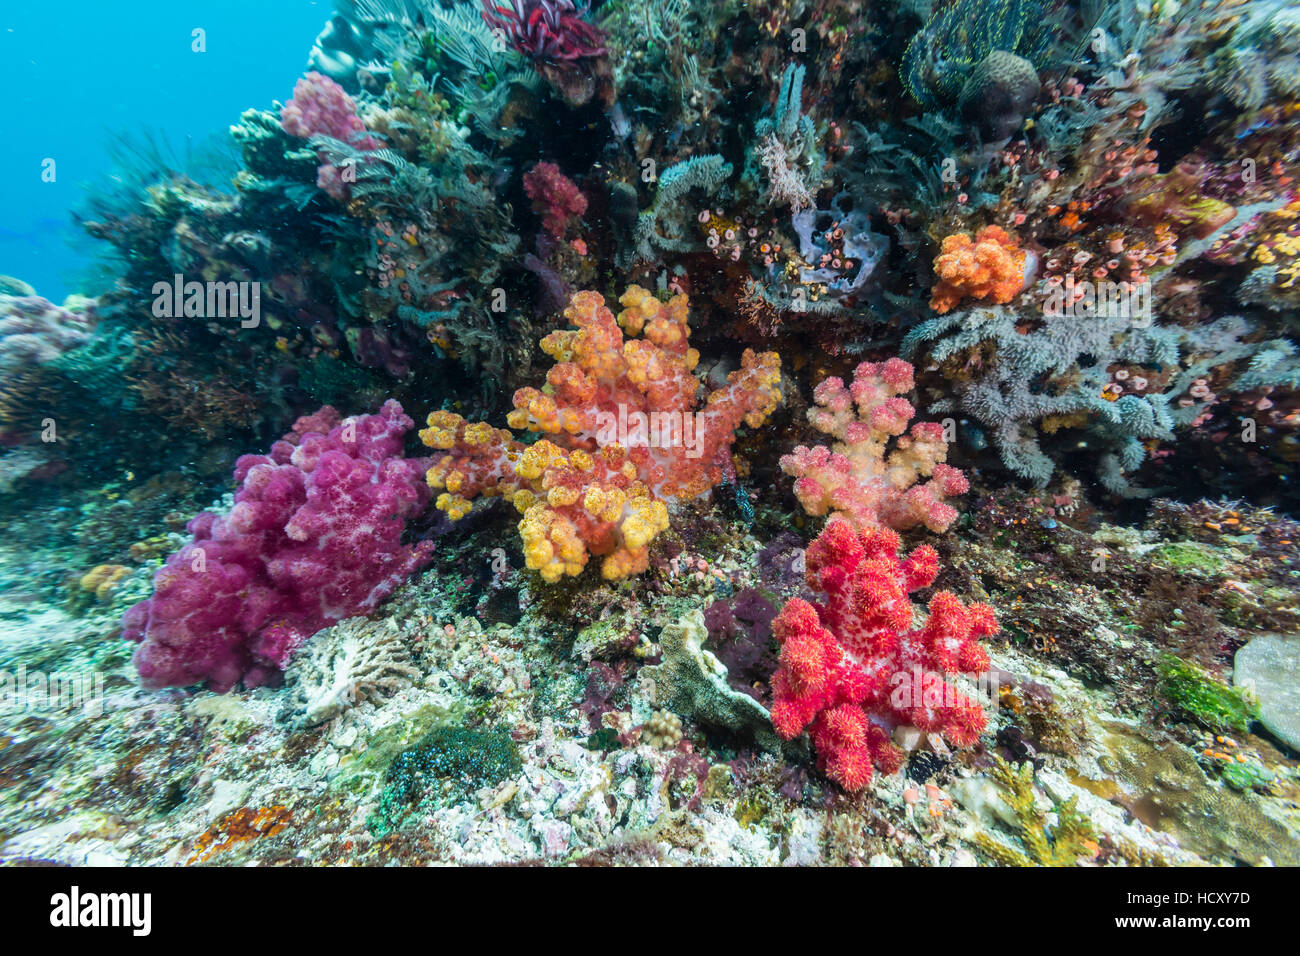 Profusion of hard and soft corals on Tengah Kecil Island, Komodo National Park, Flores Sea, Indonesia Stock Photo